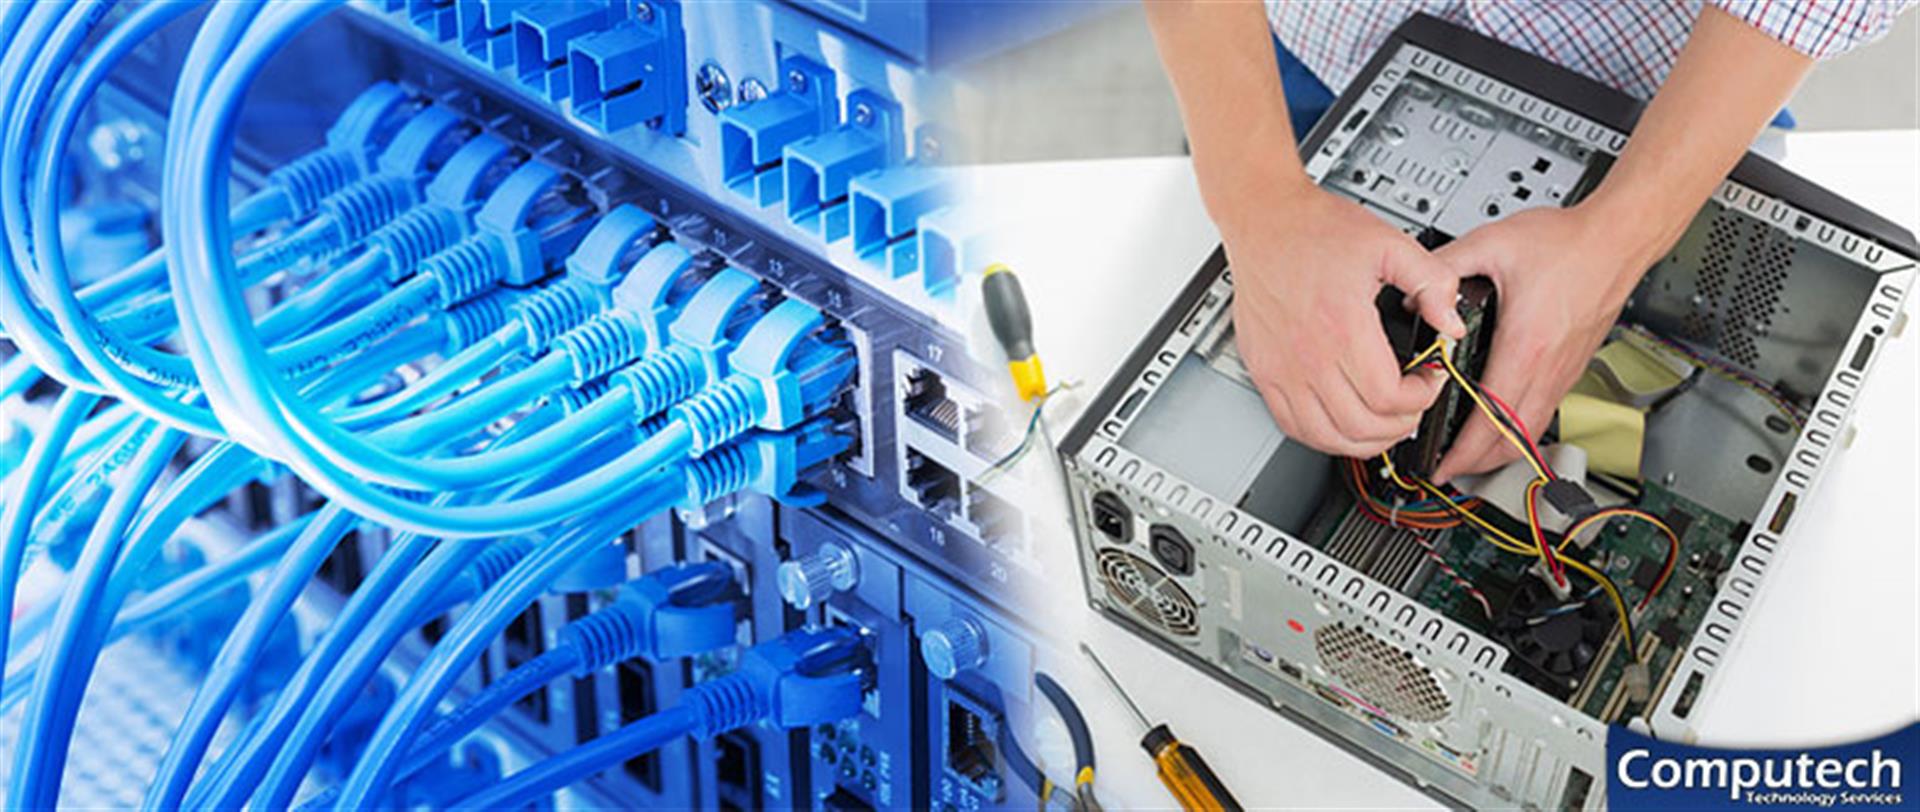 Mobile Alabama On-Site PC & Printer Repairs, Networks, Telecom & Data Cabling Solutions